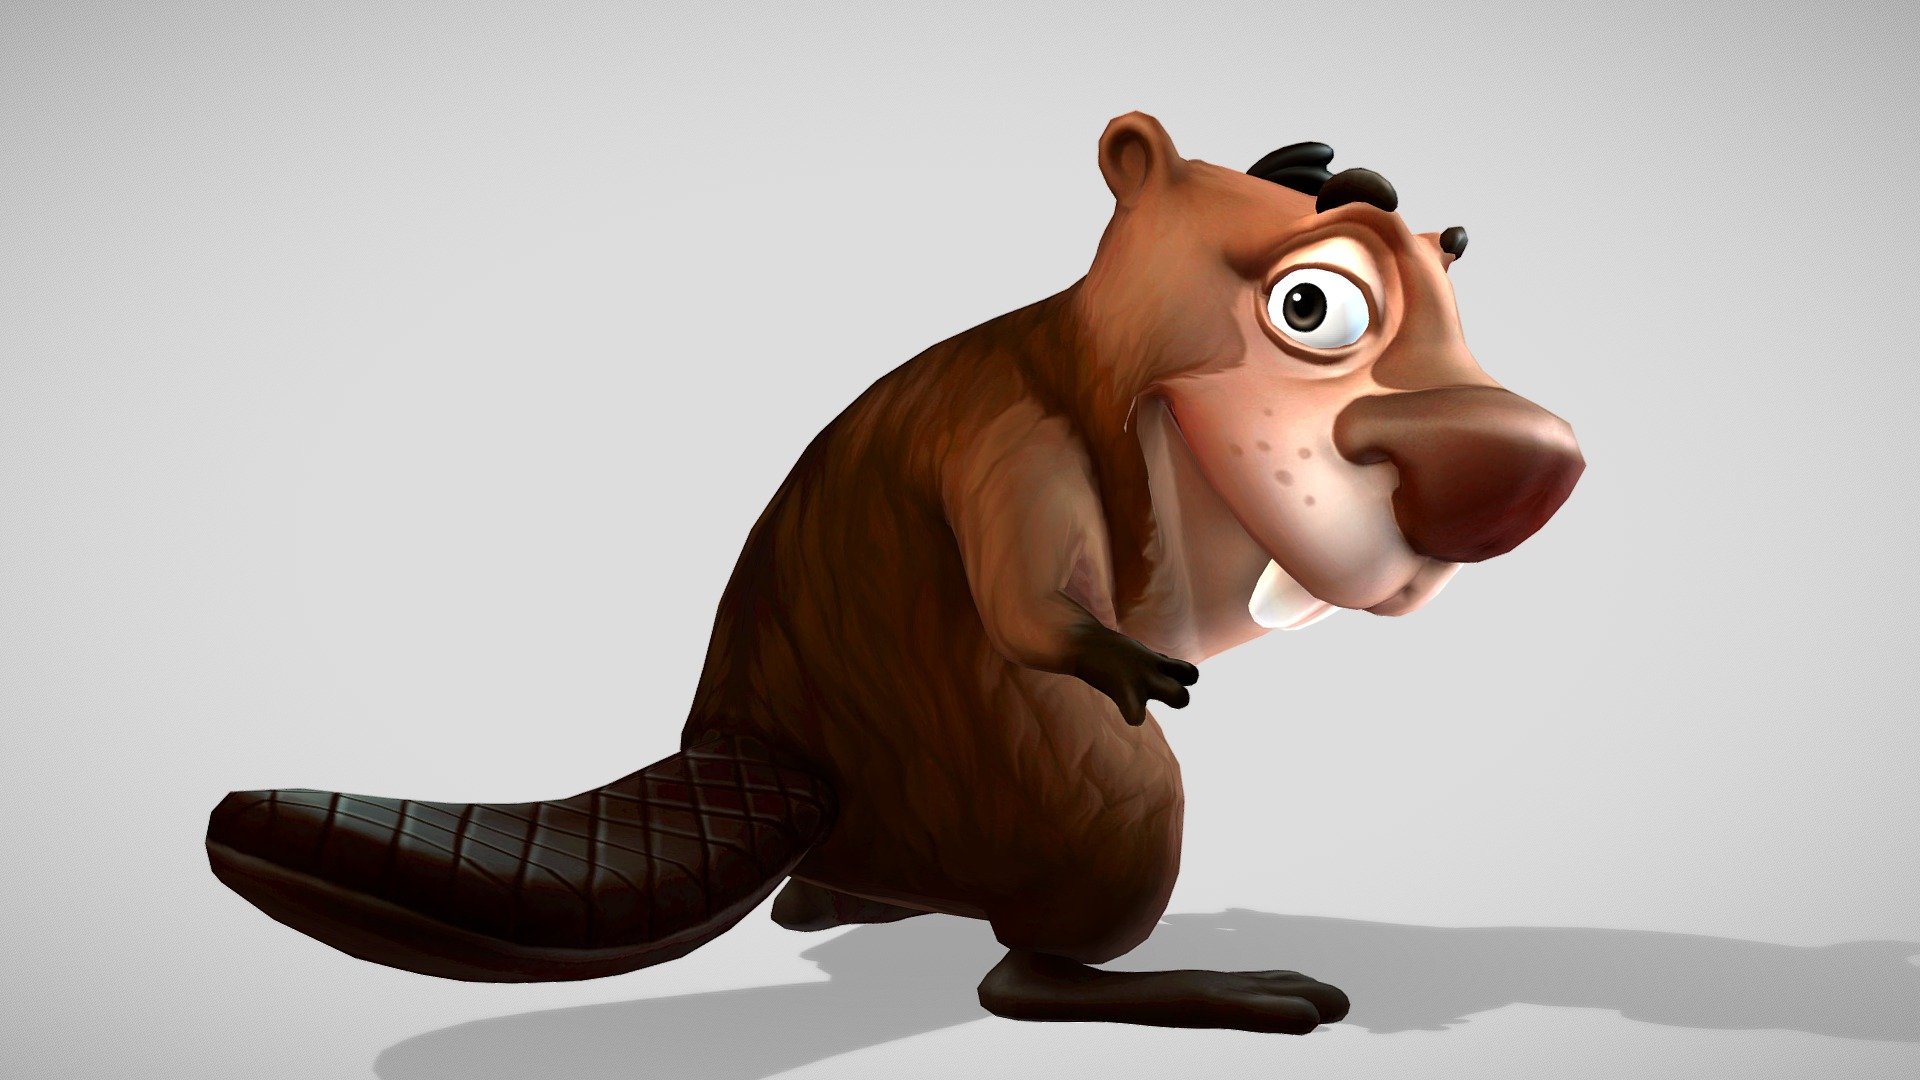 This is a cartoon beaver

Comes with the following animations:




Idle

Idle2

Walk

Run

Roll

Success

Failure

Talk

Sleep

Jump Up

Fall

Land On Ground

Kick

Get Damage

*Important: Pick up, carry, and throw animations not currently present! *

Triangle Count: 8712

Offered File Format: FBX

This characters contain no blendshapes. Facial animation is handled with bone animation.

Texture Size 2048x2048 (Both for color and normals)

For more info contact me: dogzerx@hotmail.com

Thank you! - Beaver - Buy Royalty Free 3D model by JoseDiaz 3d model